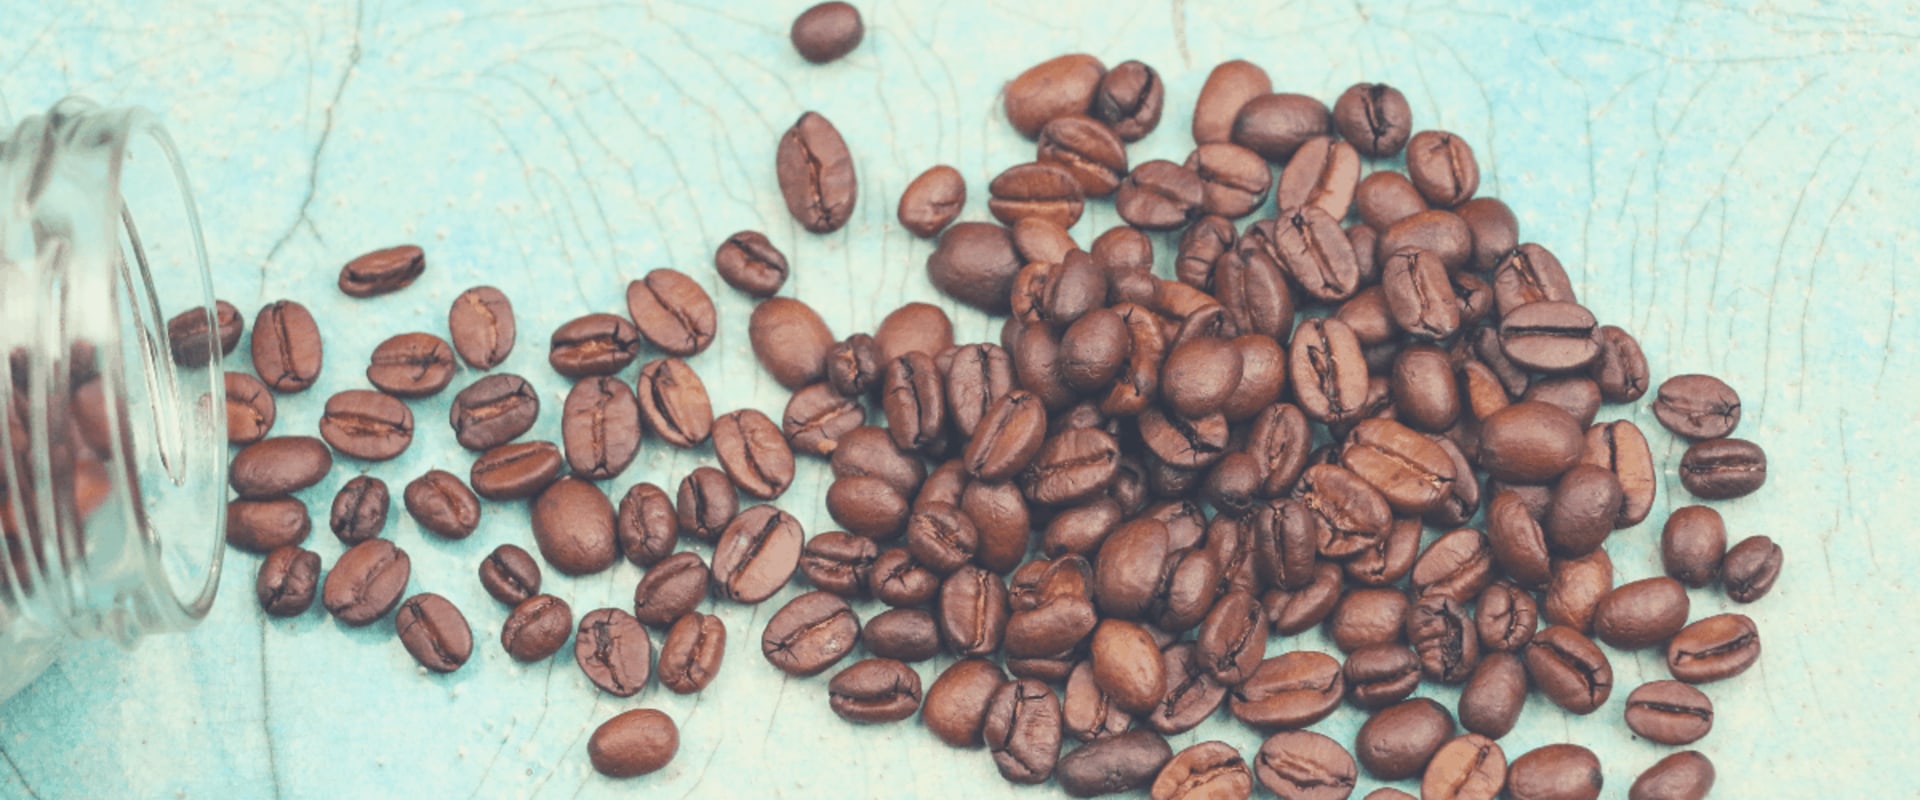 Are Coffee Beans Legumes? A Comprehensive Guide